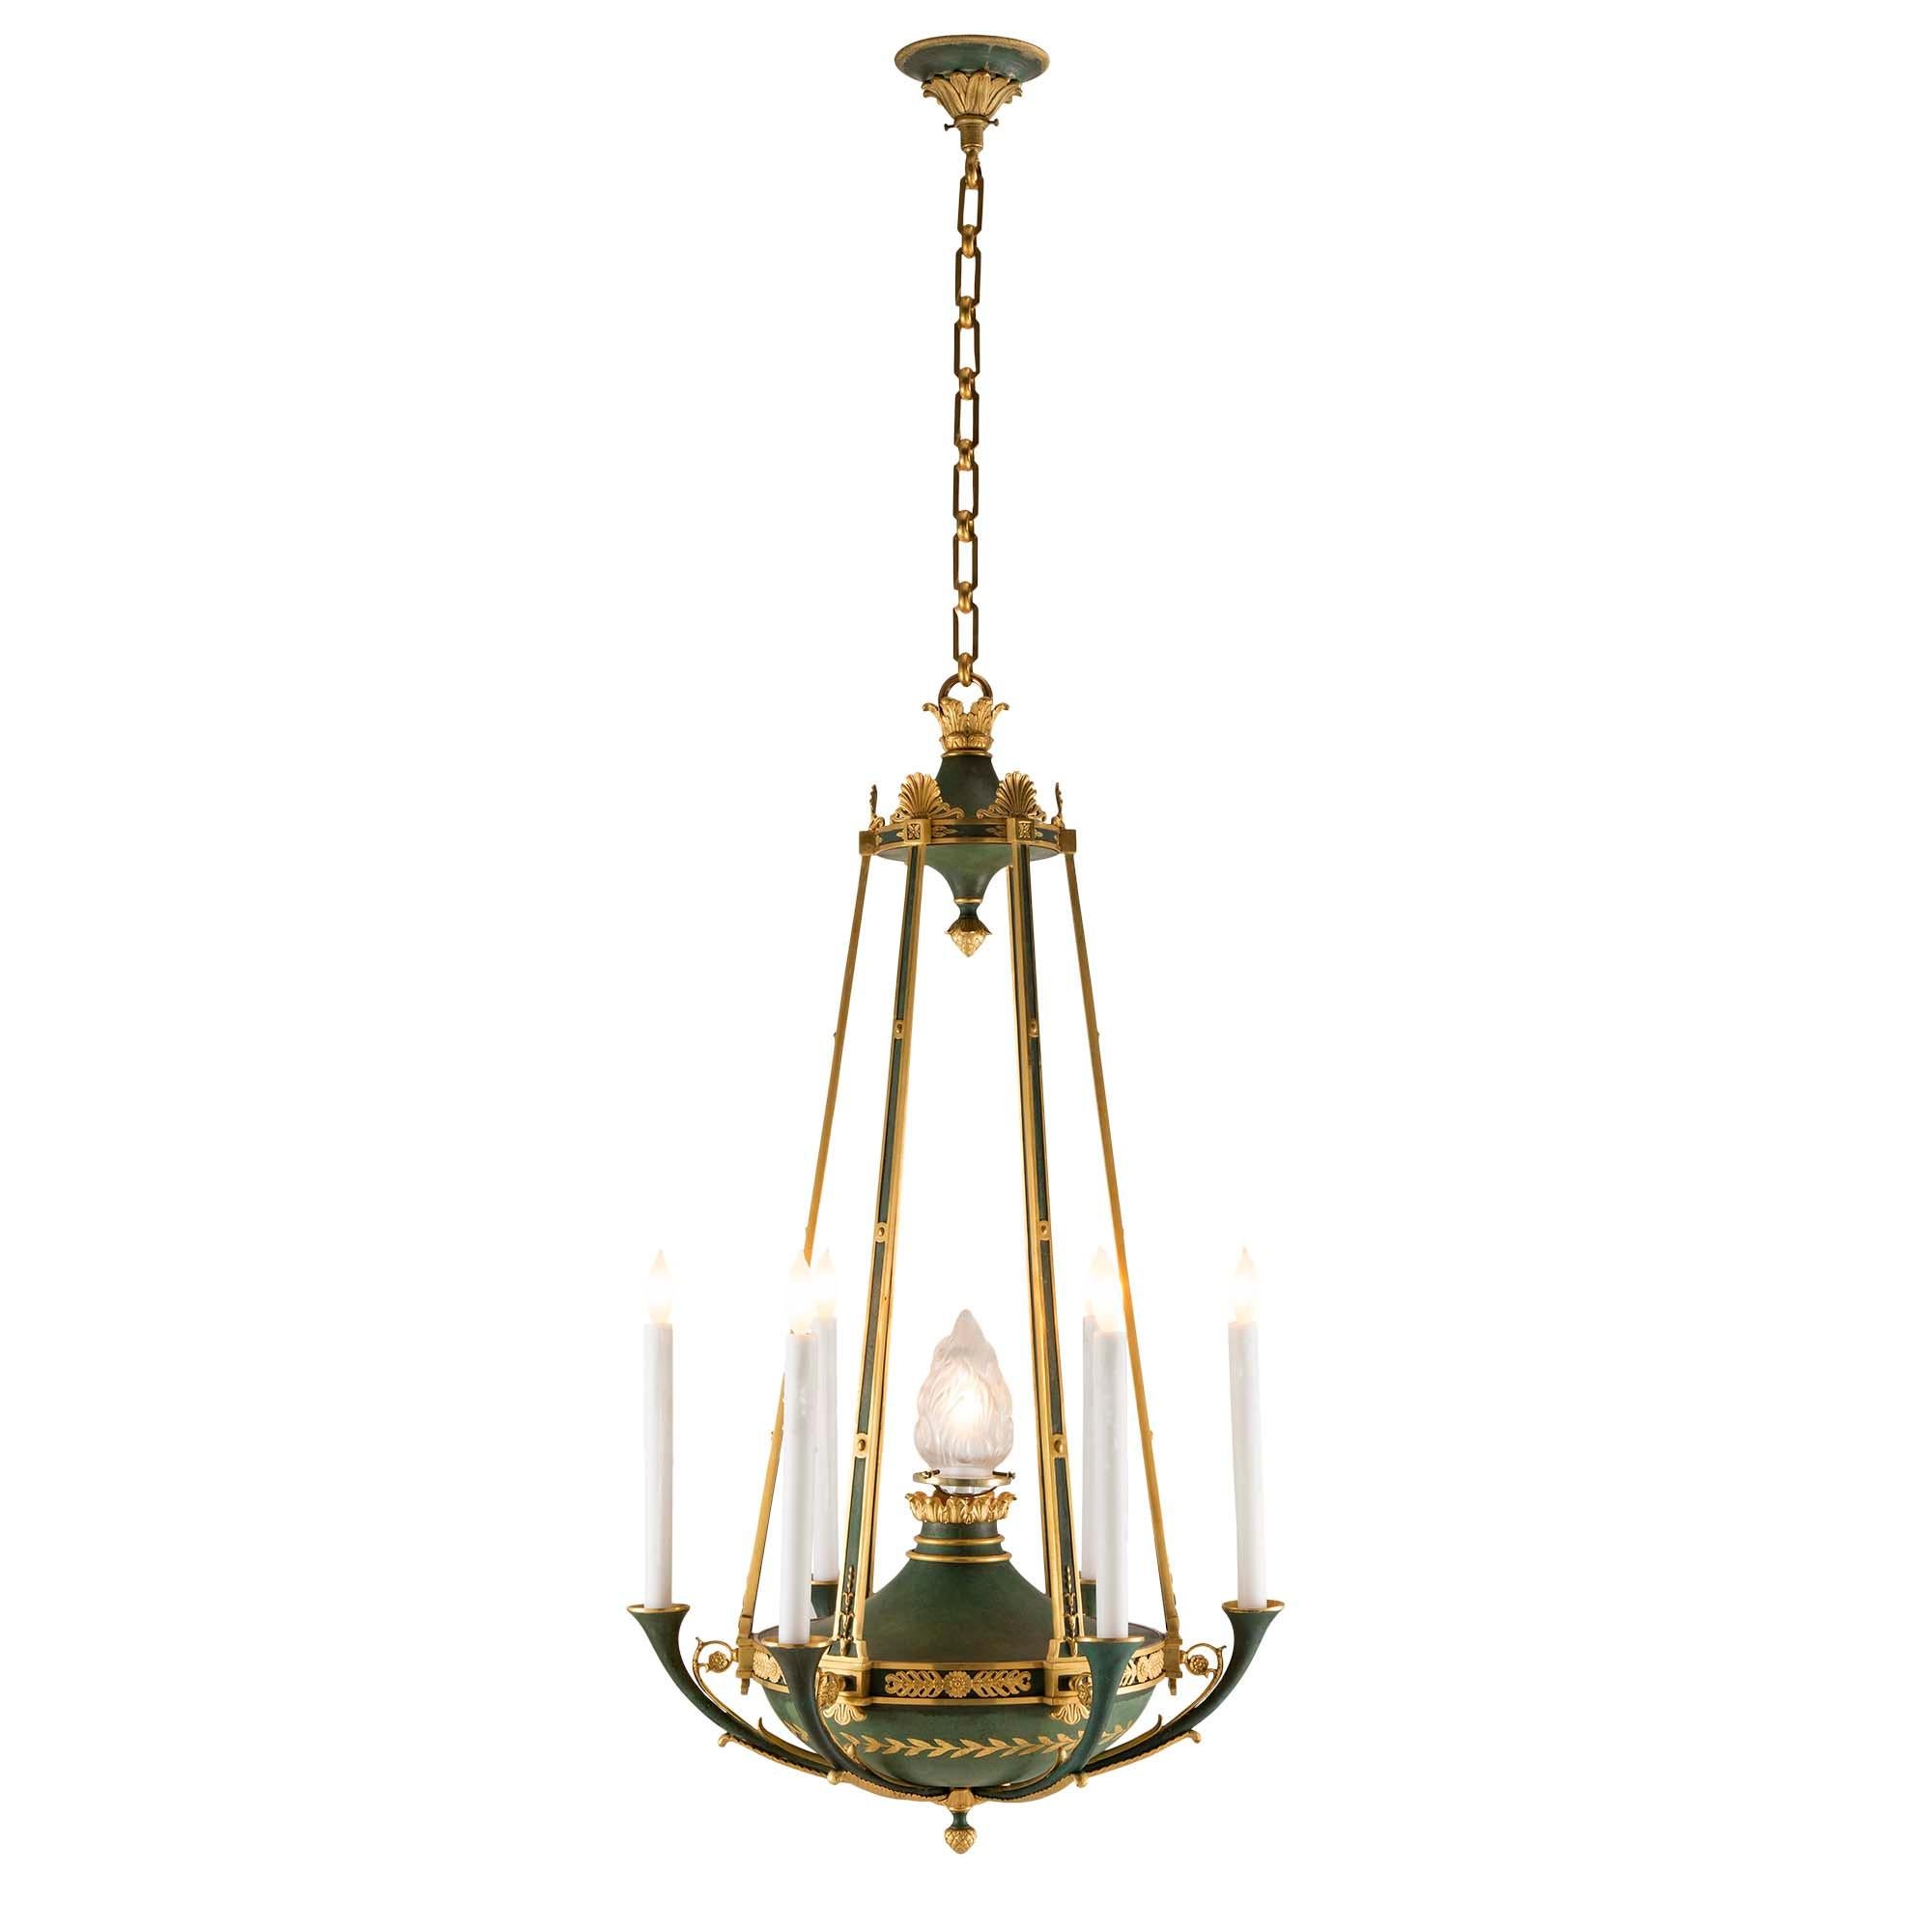 A handsome and extremely decorative pair of French 19th century Neo-Classical st. ormolu and verdigris chandeliers. Each six arm seven light chandelier is centered by a giltwood inverted acorn finial on a verdigris background. The verdigris base